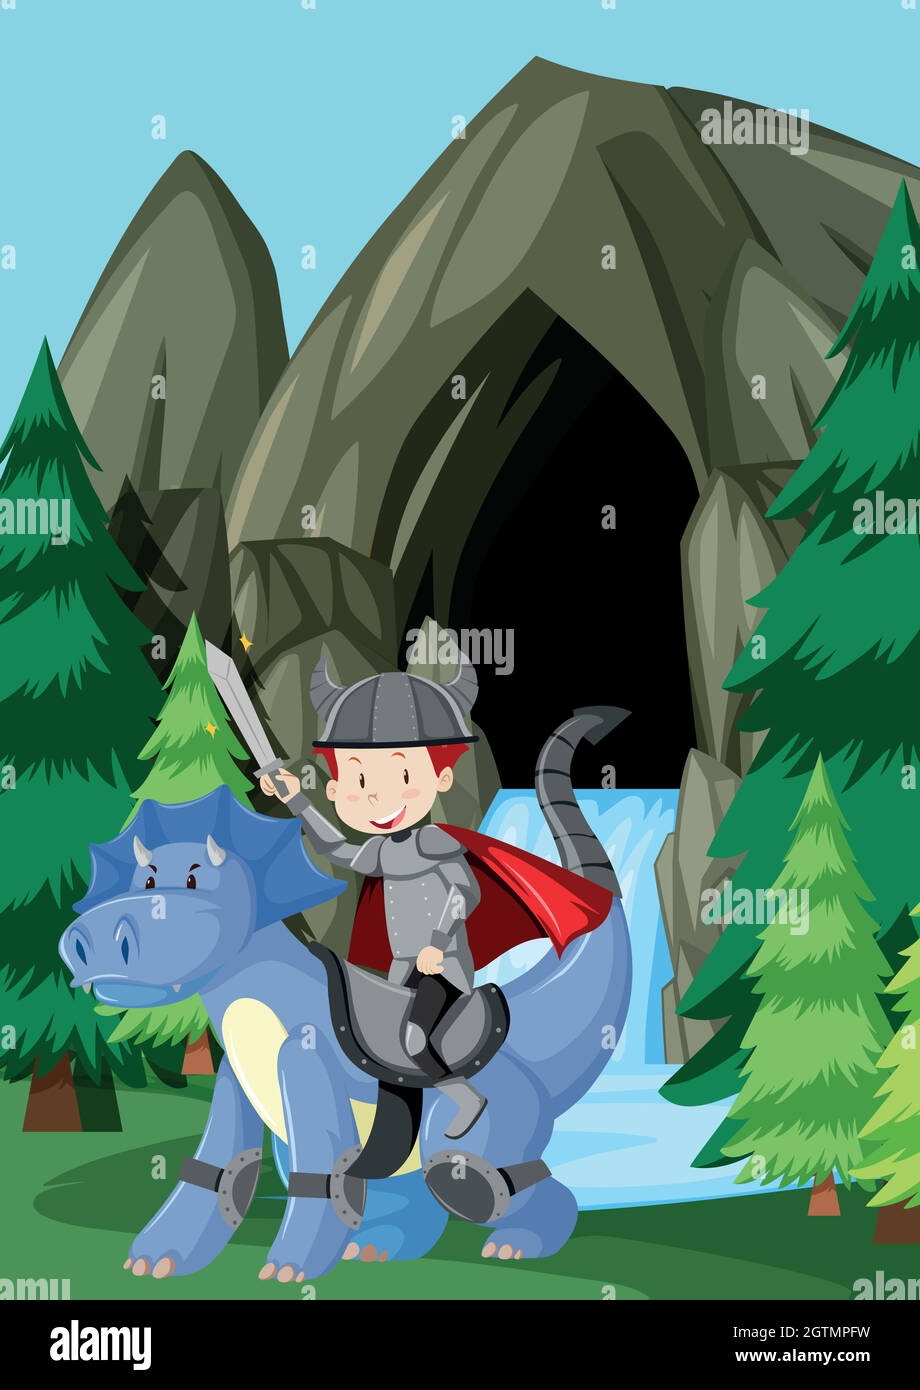 A prince riding dragon in nature Stock Vector